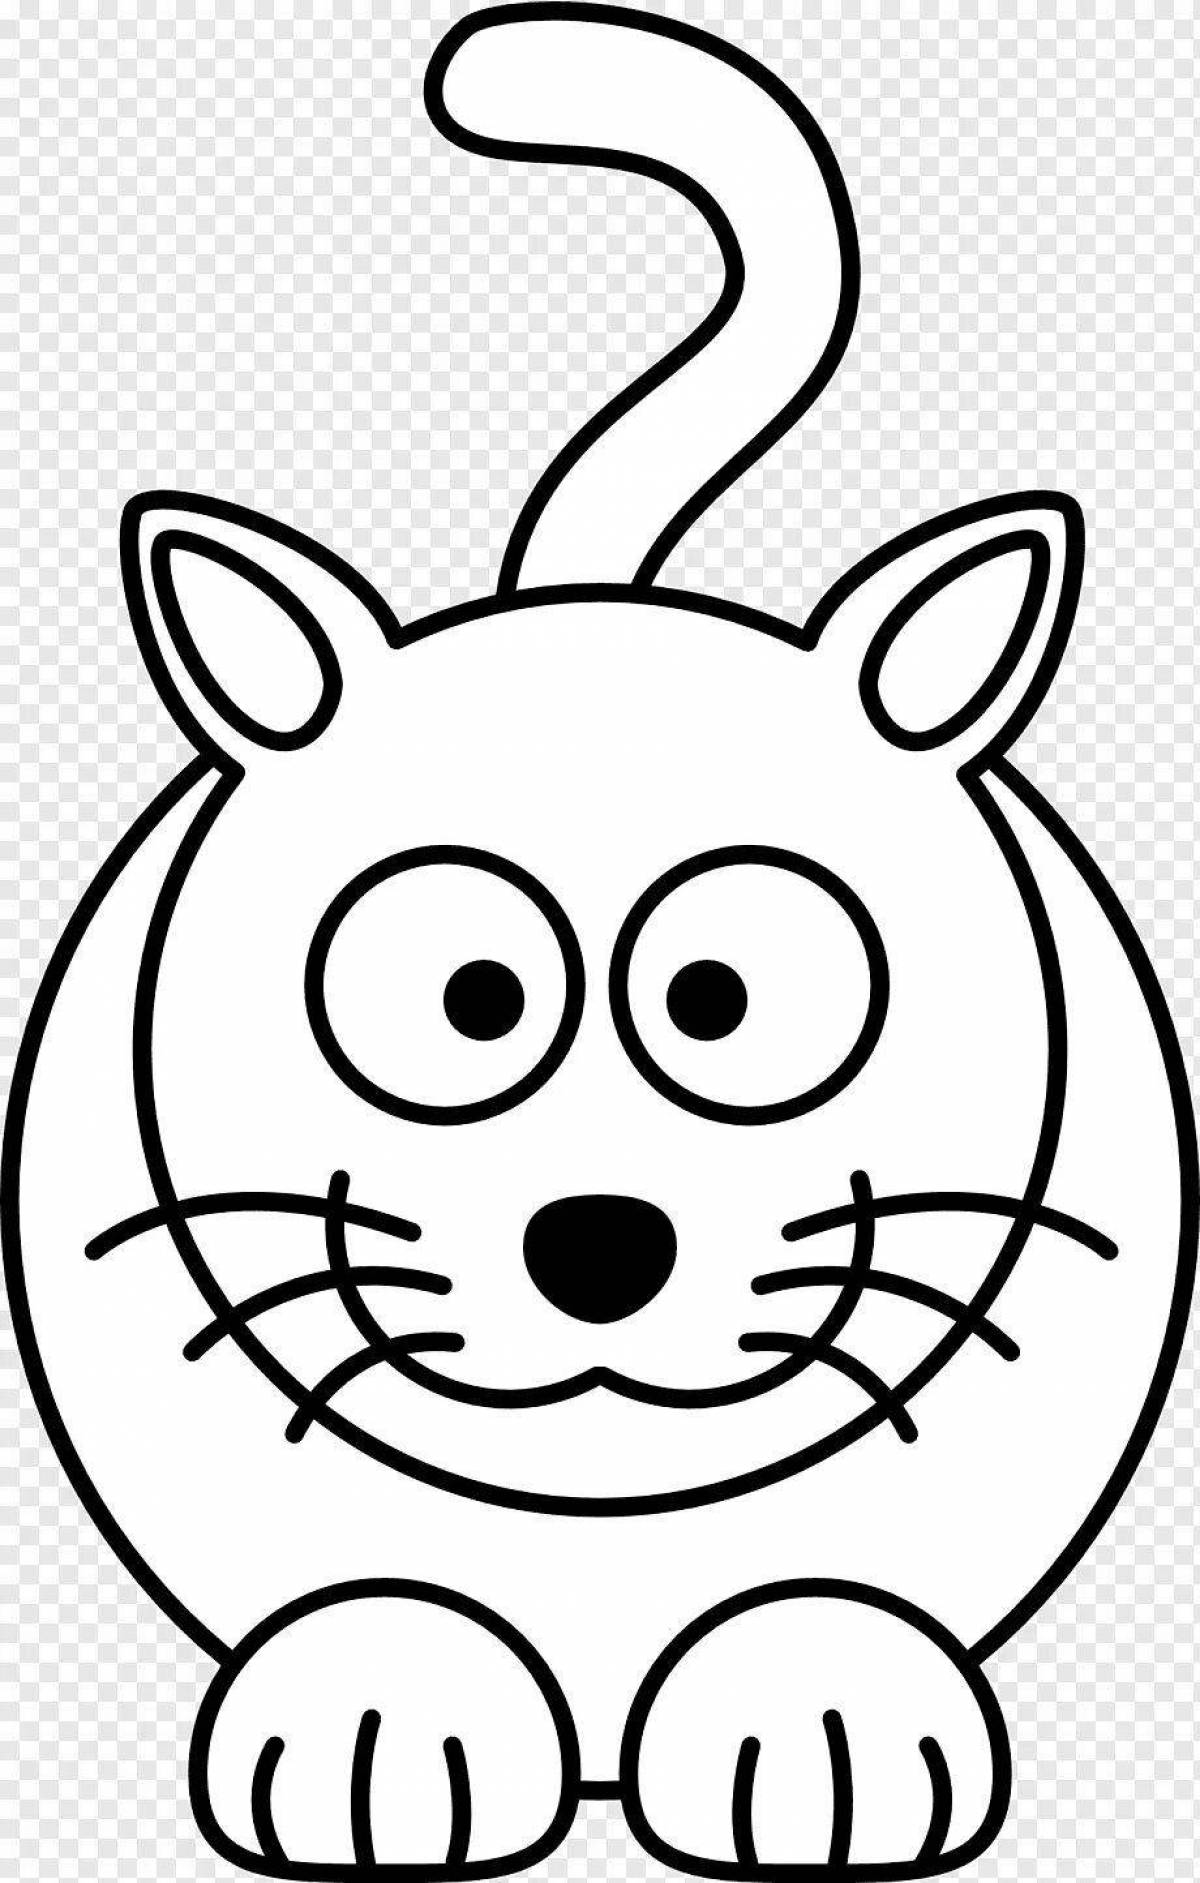 Coloring page friendly black and white cat